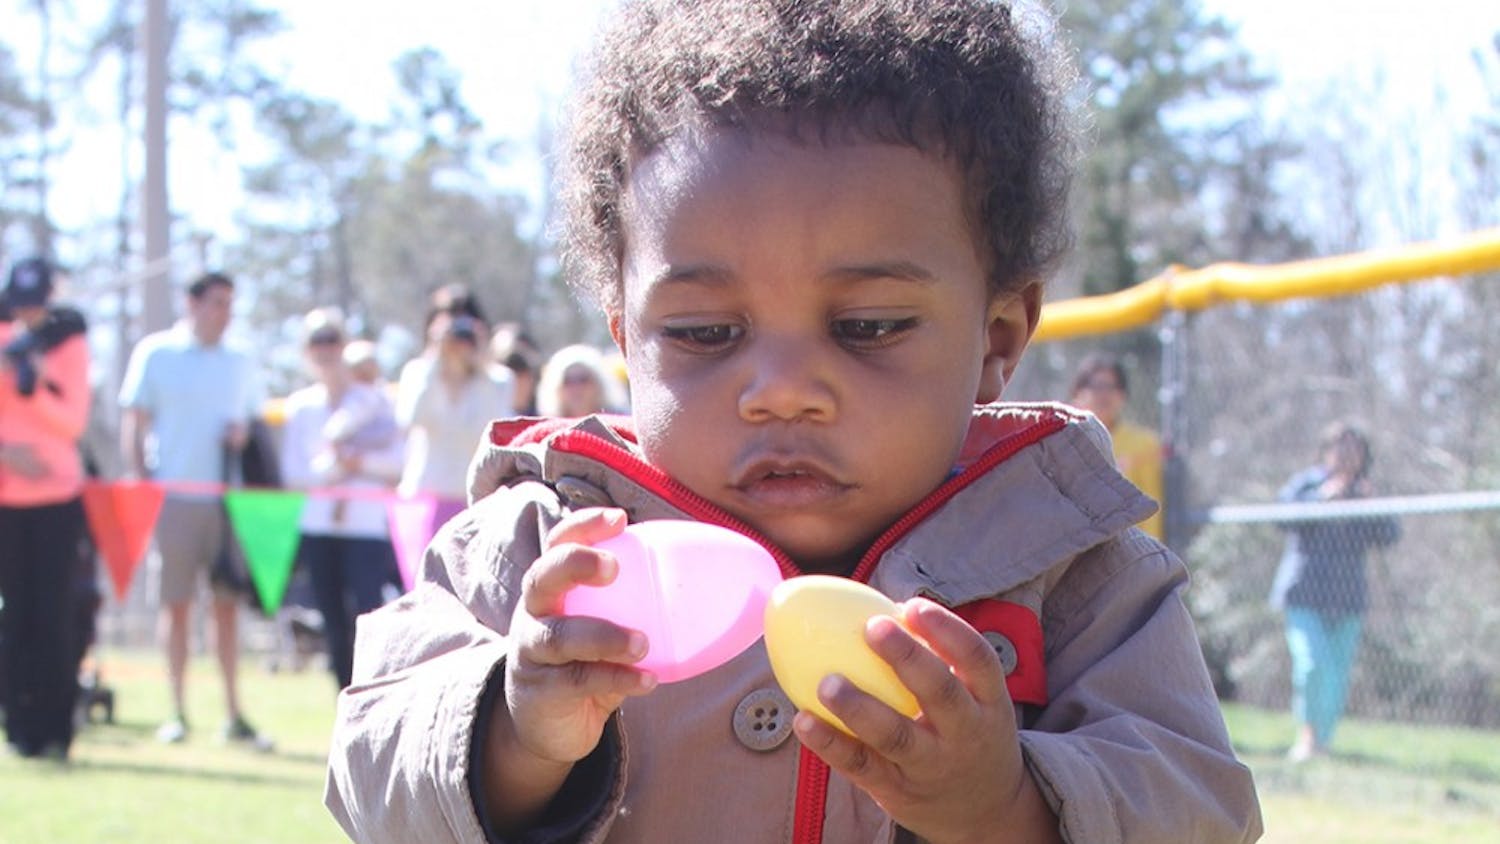 Kids participate in an egg hunt at Homestead Park in Chapel Hill on April 5.